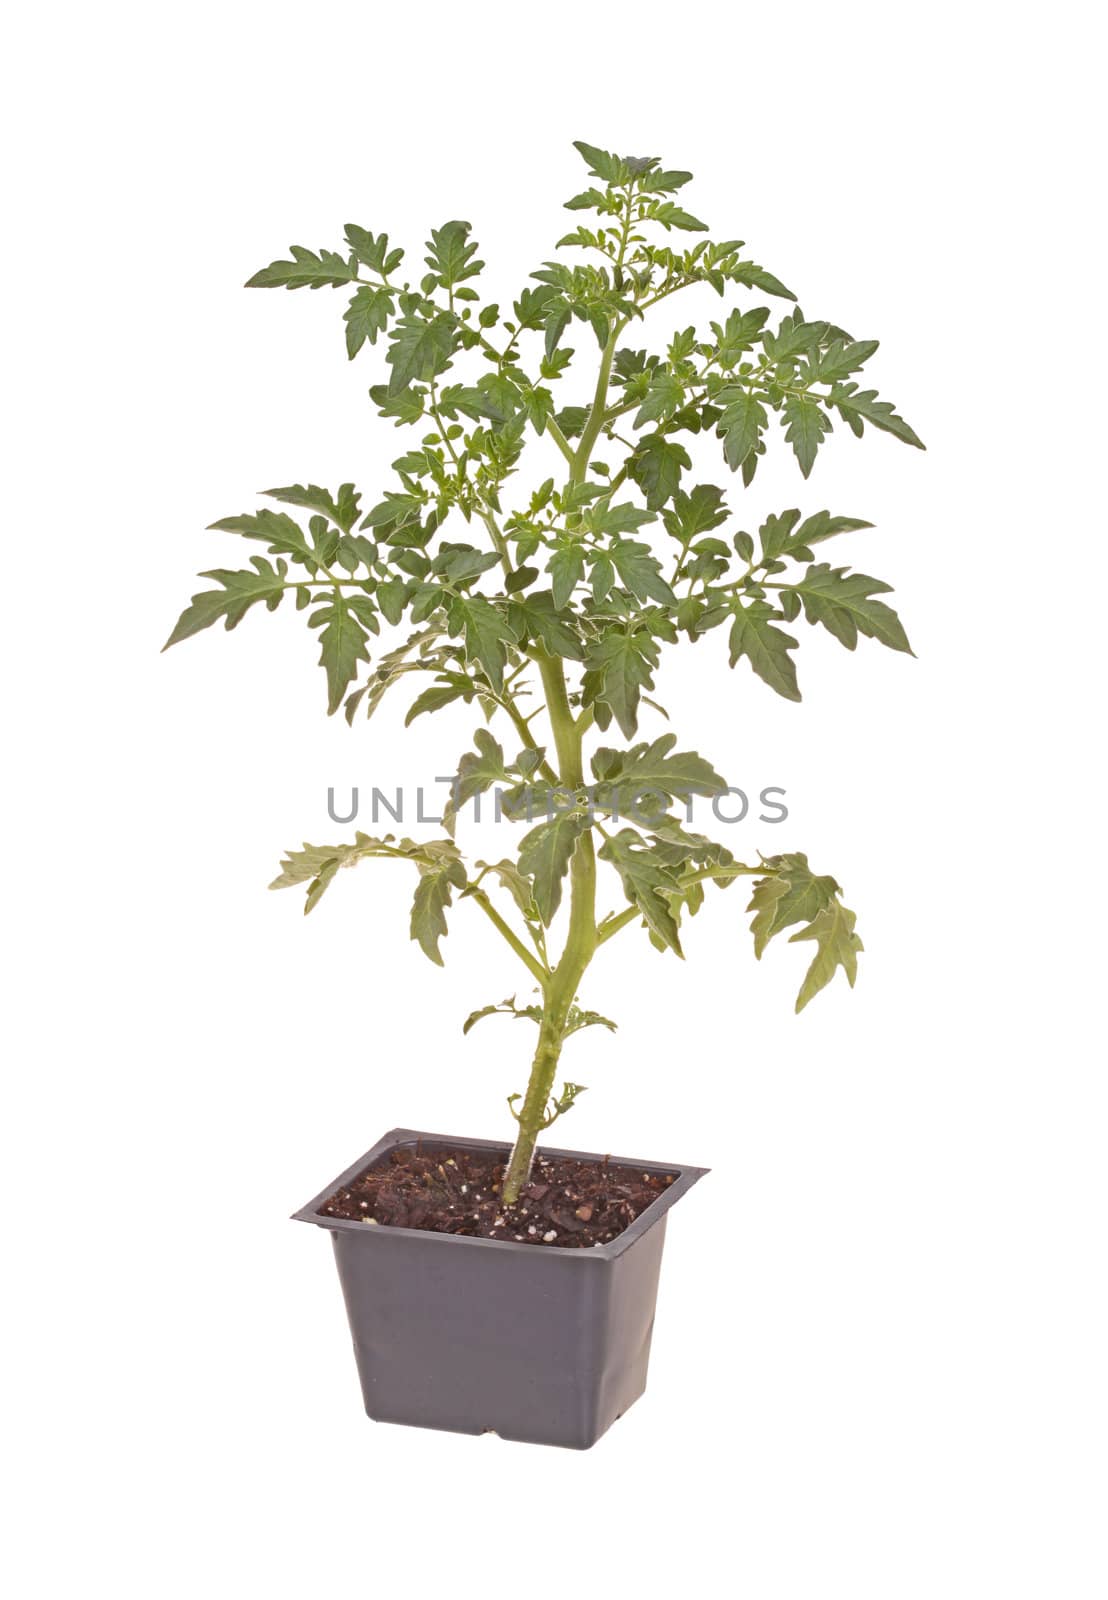 A single seedling of a cherry tomato (Solanum lycopersicum or Lycopersicon esculentum) ready to be transplanted into a home garden isolated against a white background